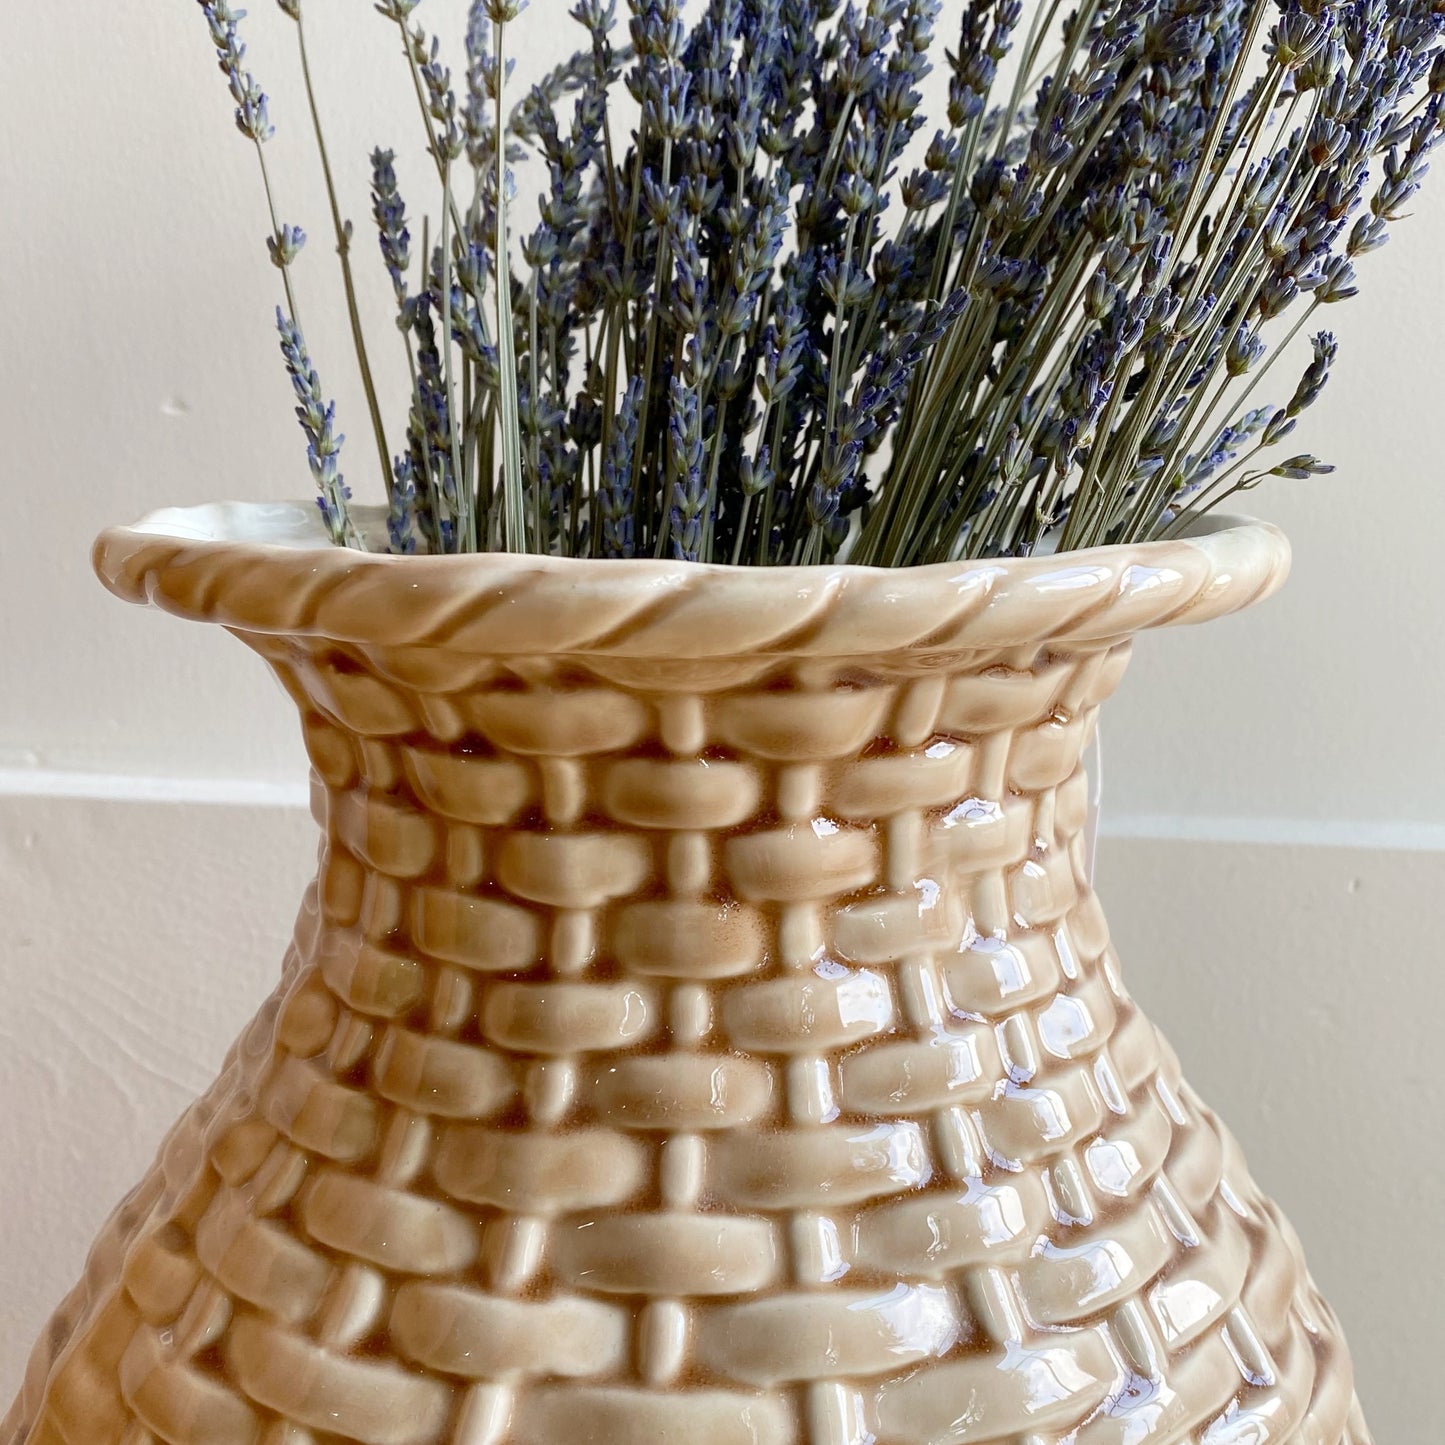 XL Ceramic Vase with Woven Texture, 13"